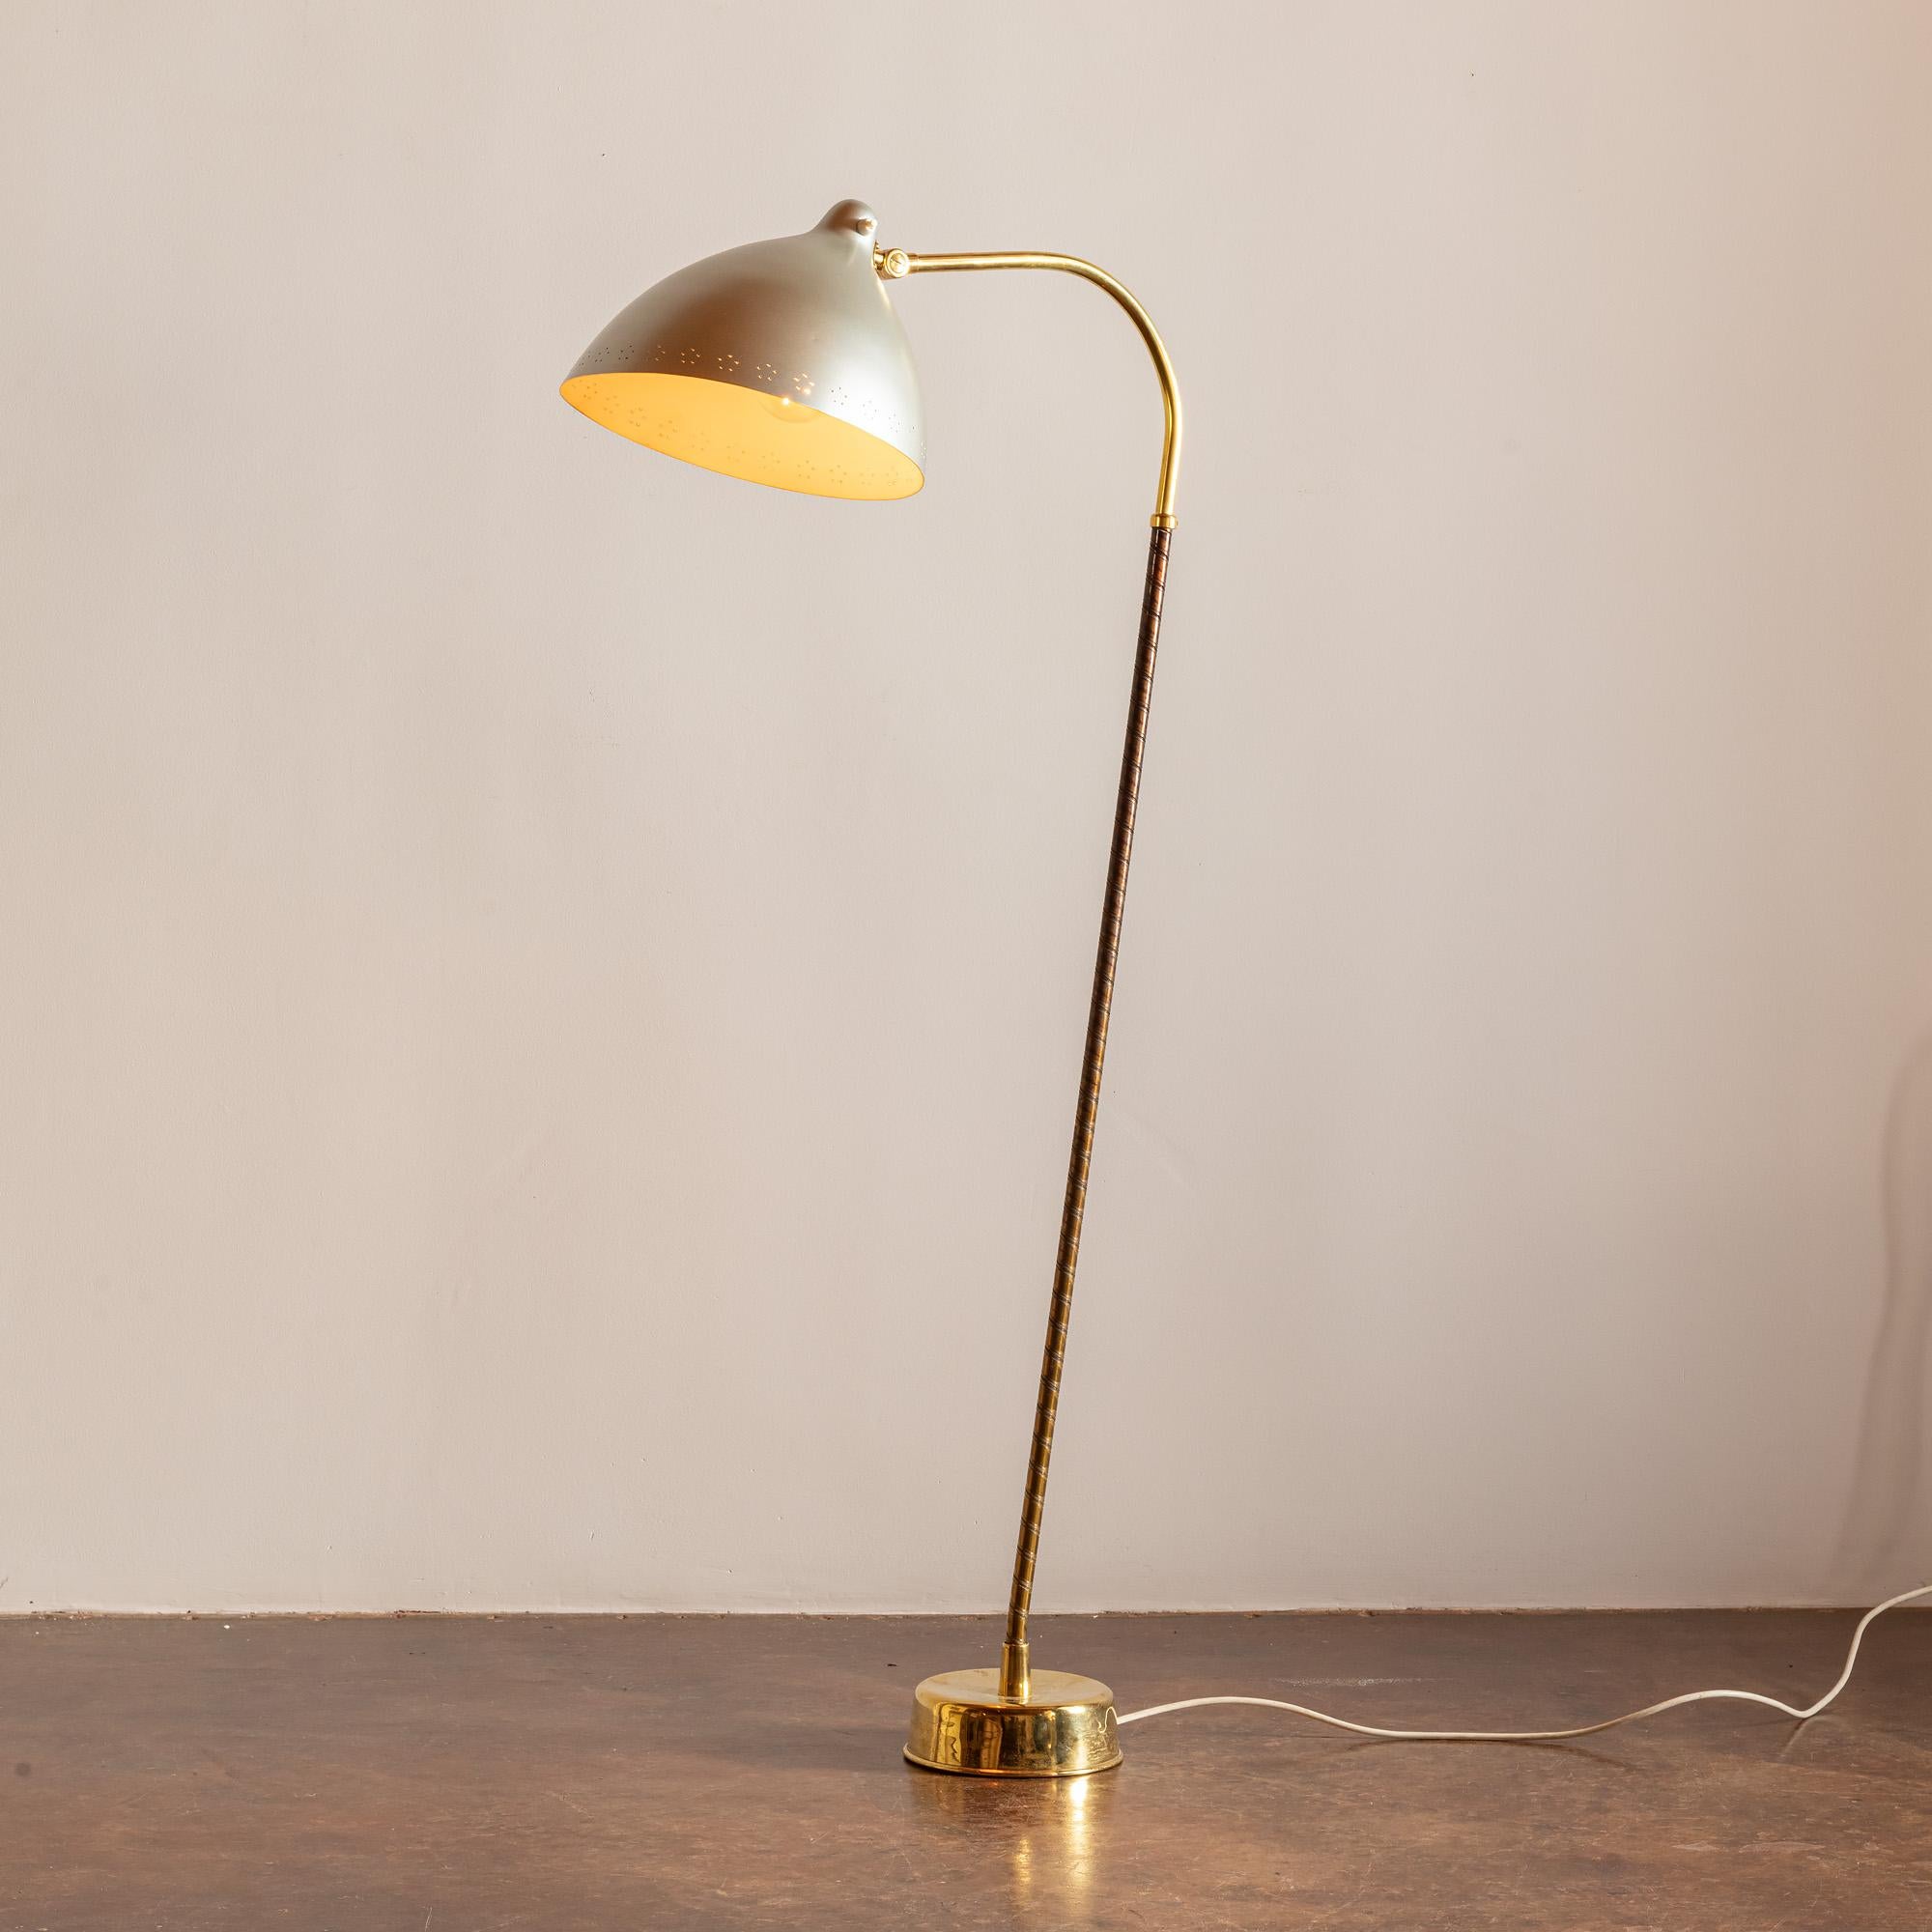 An elegant and rare example of this floor lamp by Finnish designer Lisa Johansson-Pape for Orno in the 1950s. This example with brass shaft and base, and shade in steel. The shaft is wrapped in cognac leather.